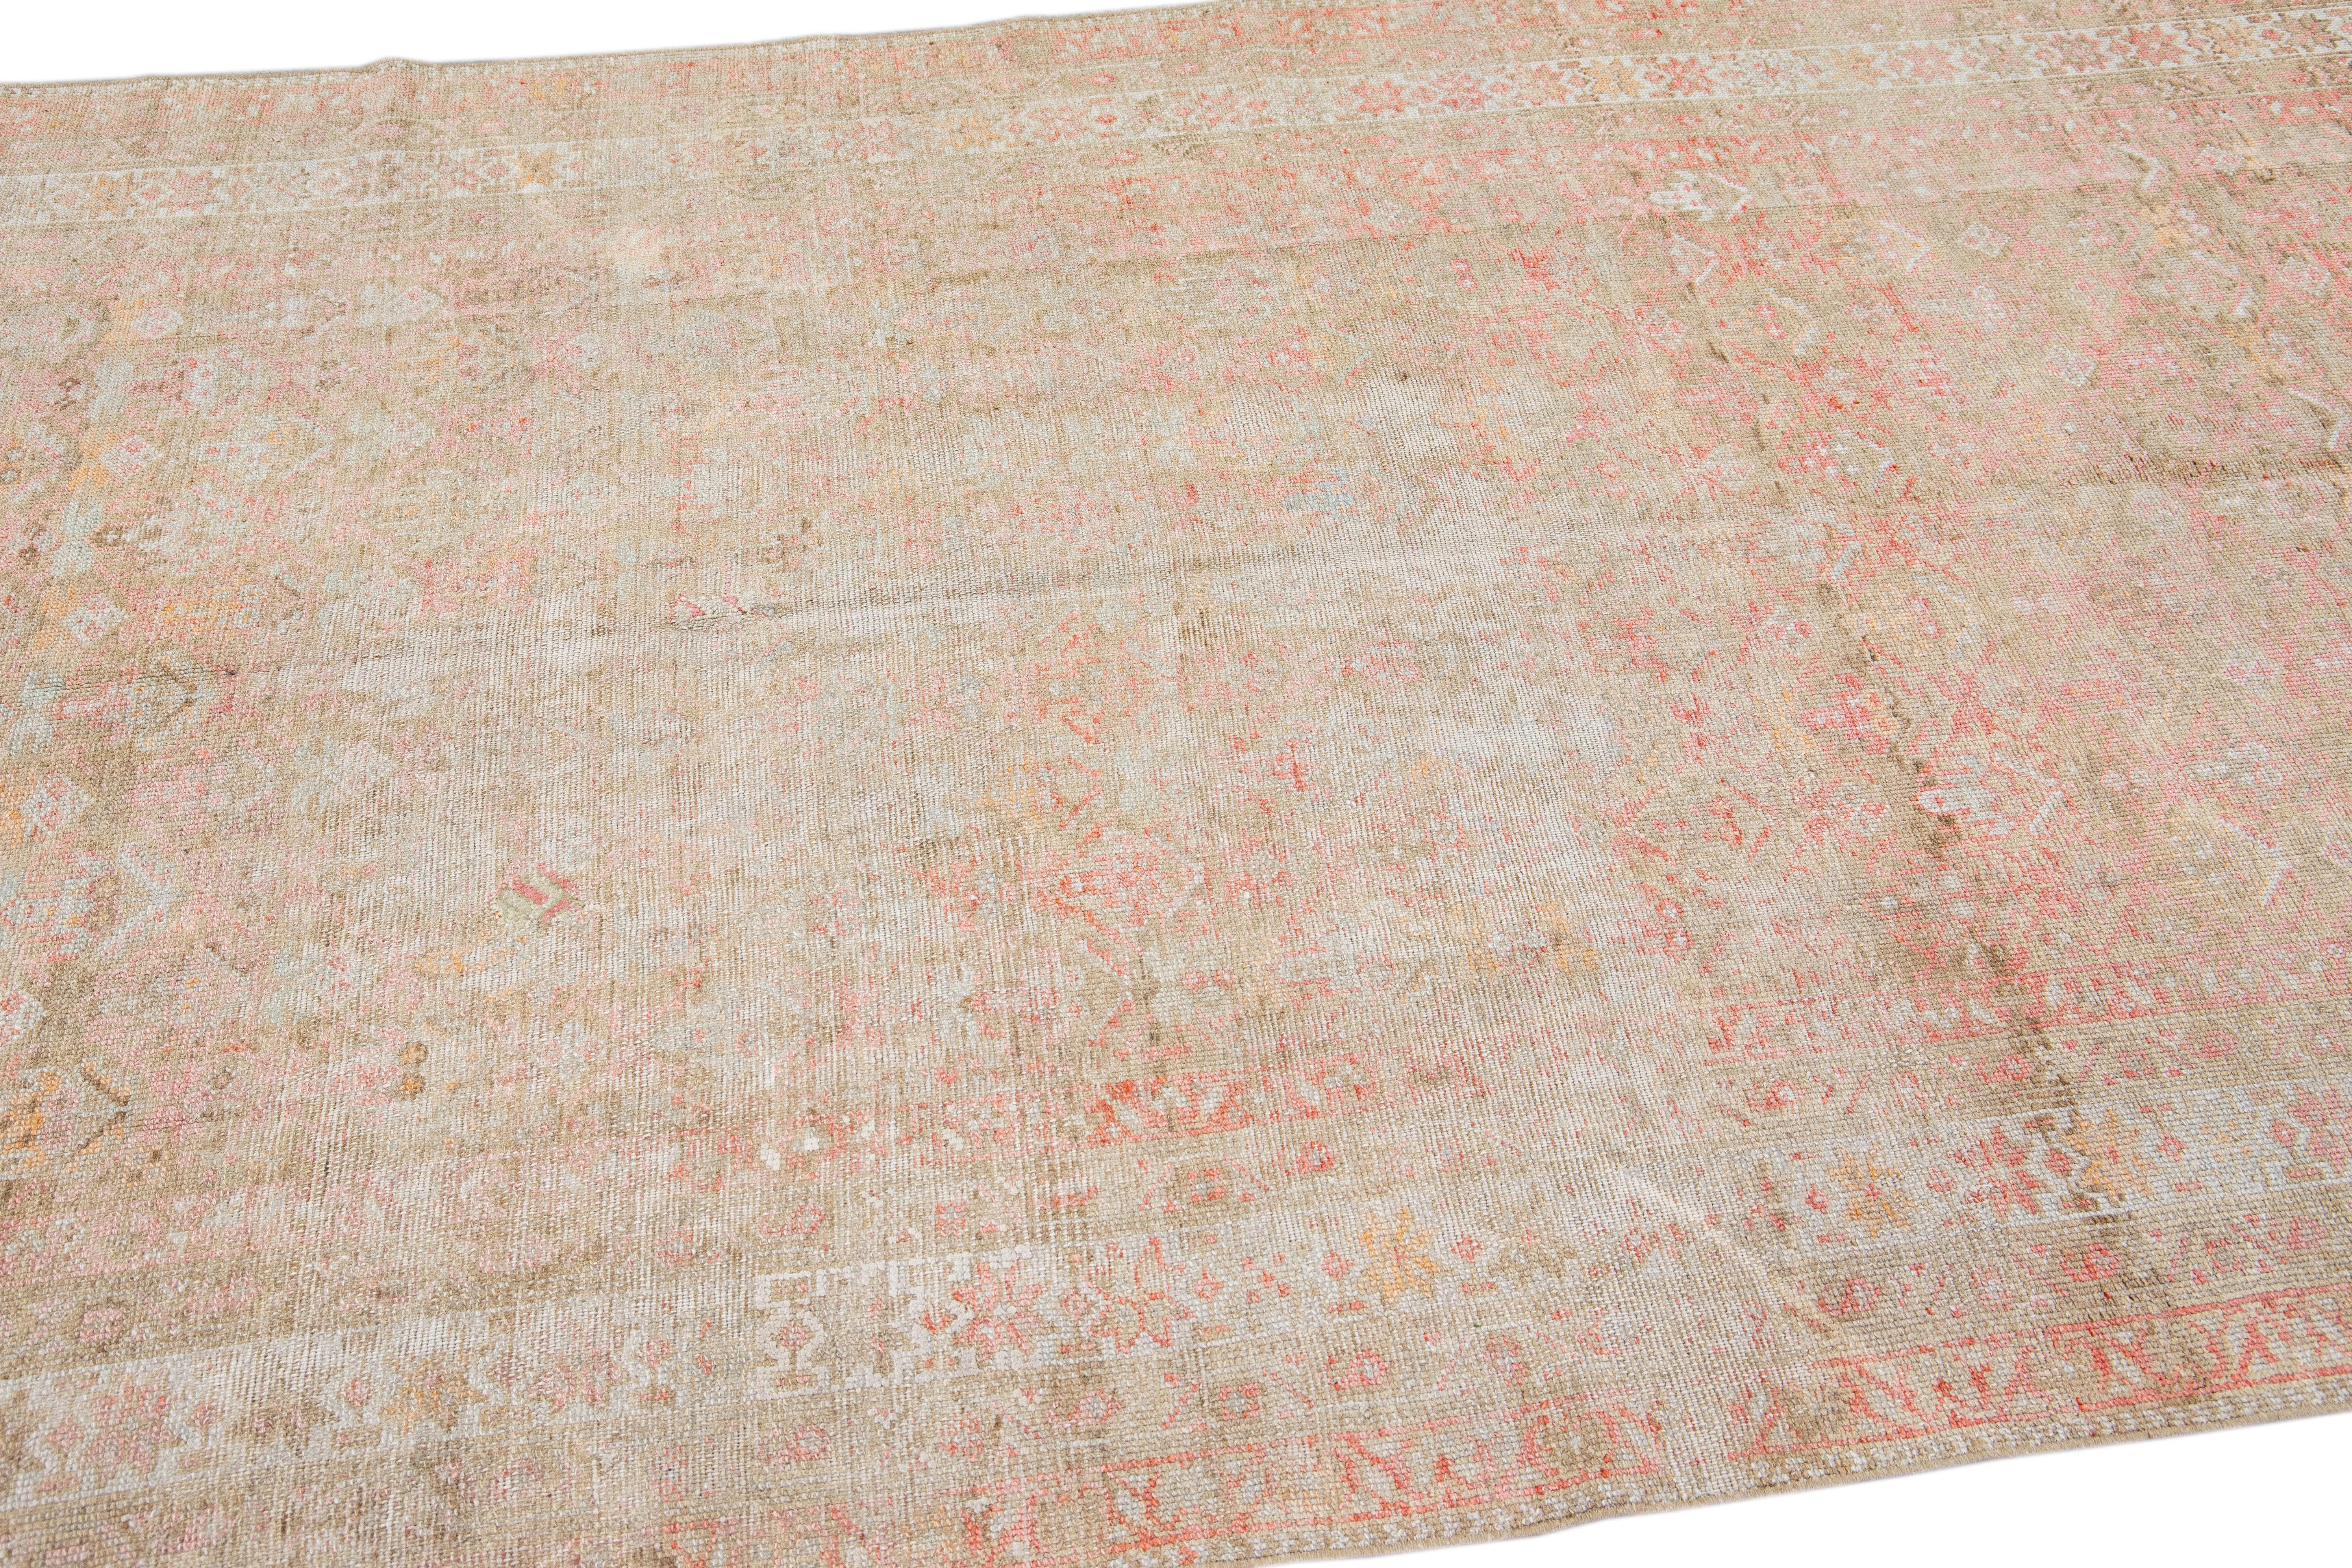 Hand-Knotted Antique Malayer Handmade Geometric Pattern Pink and Tan Scatter Wool Rug For Sale